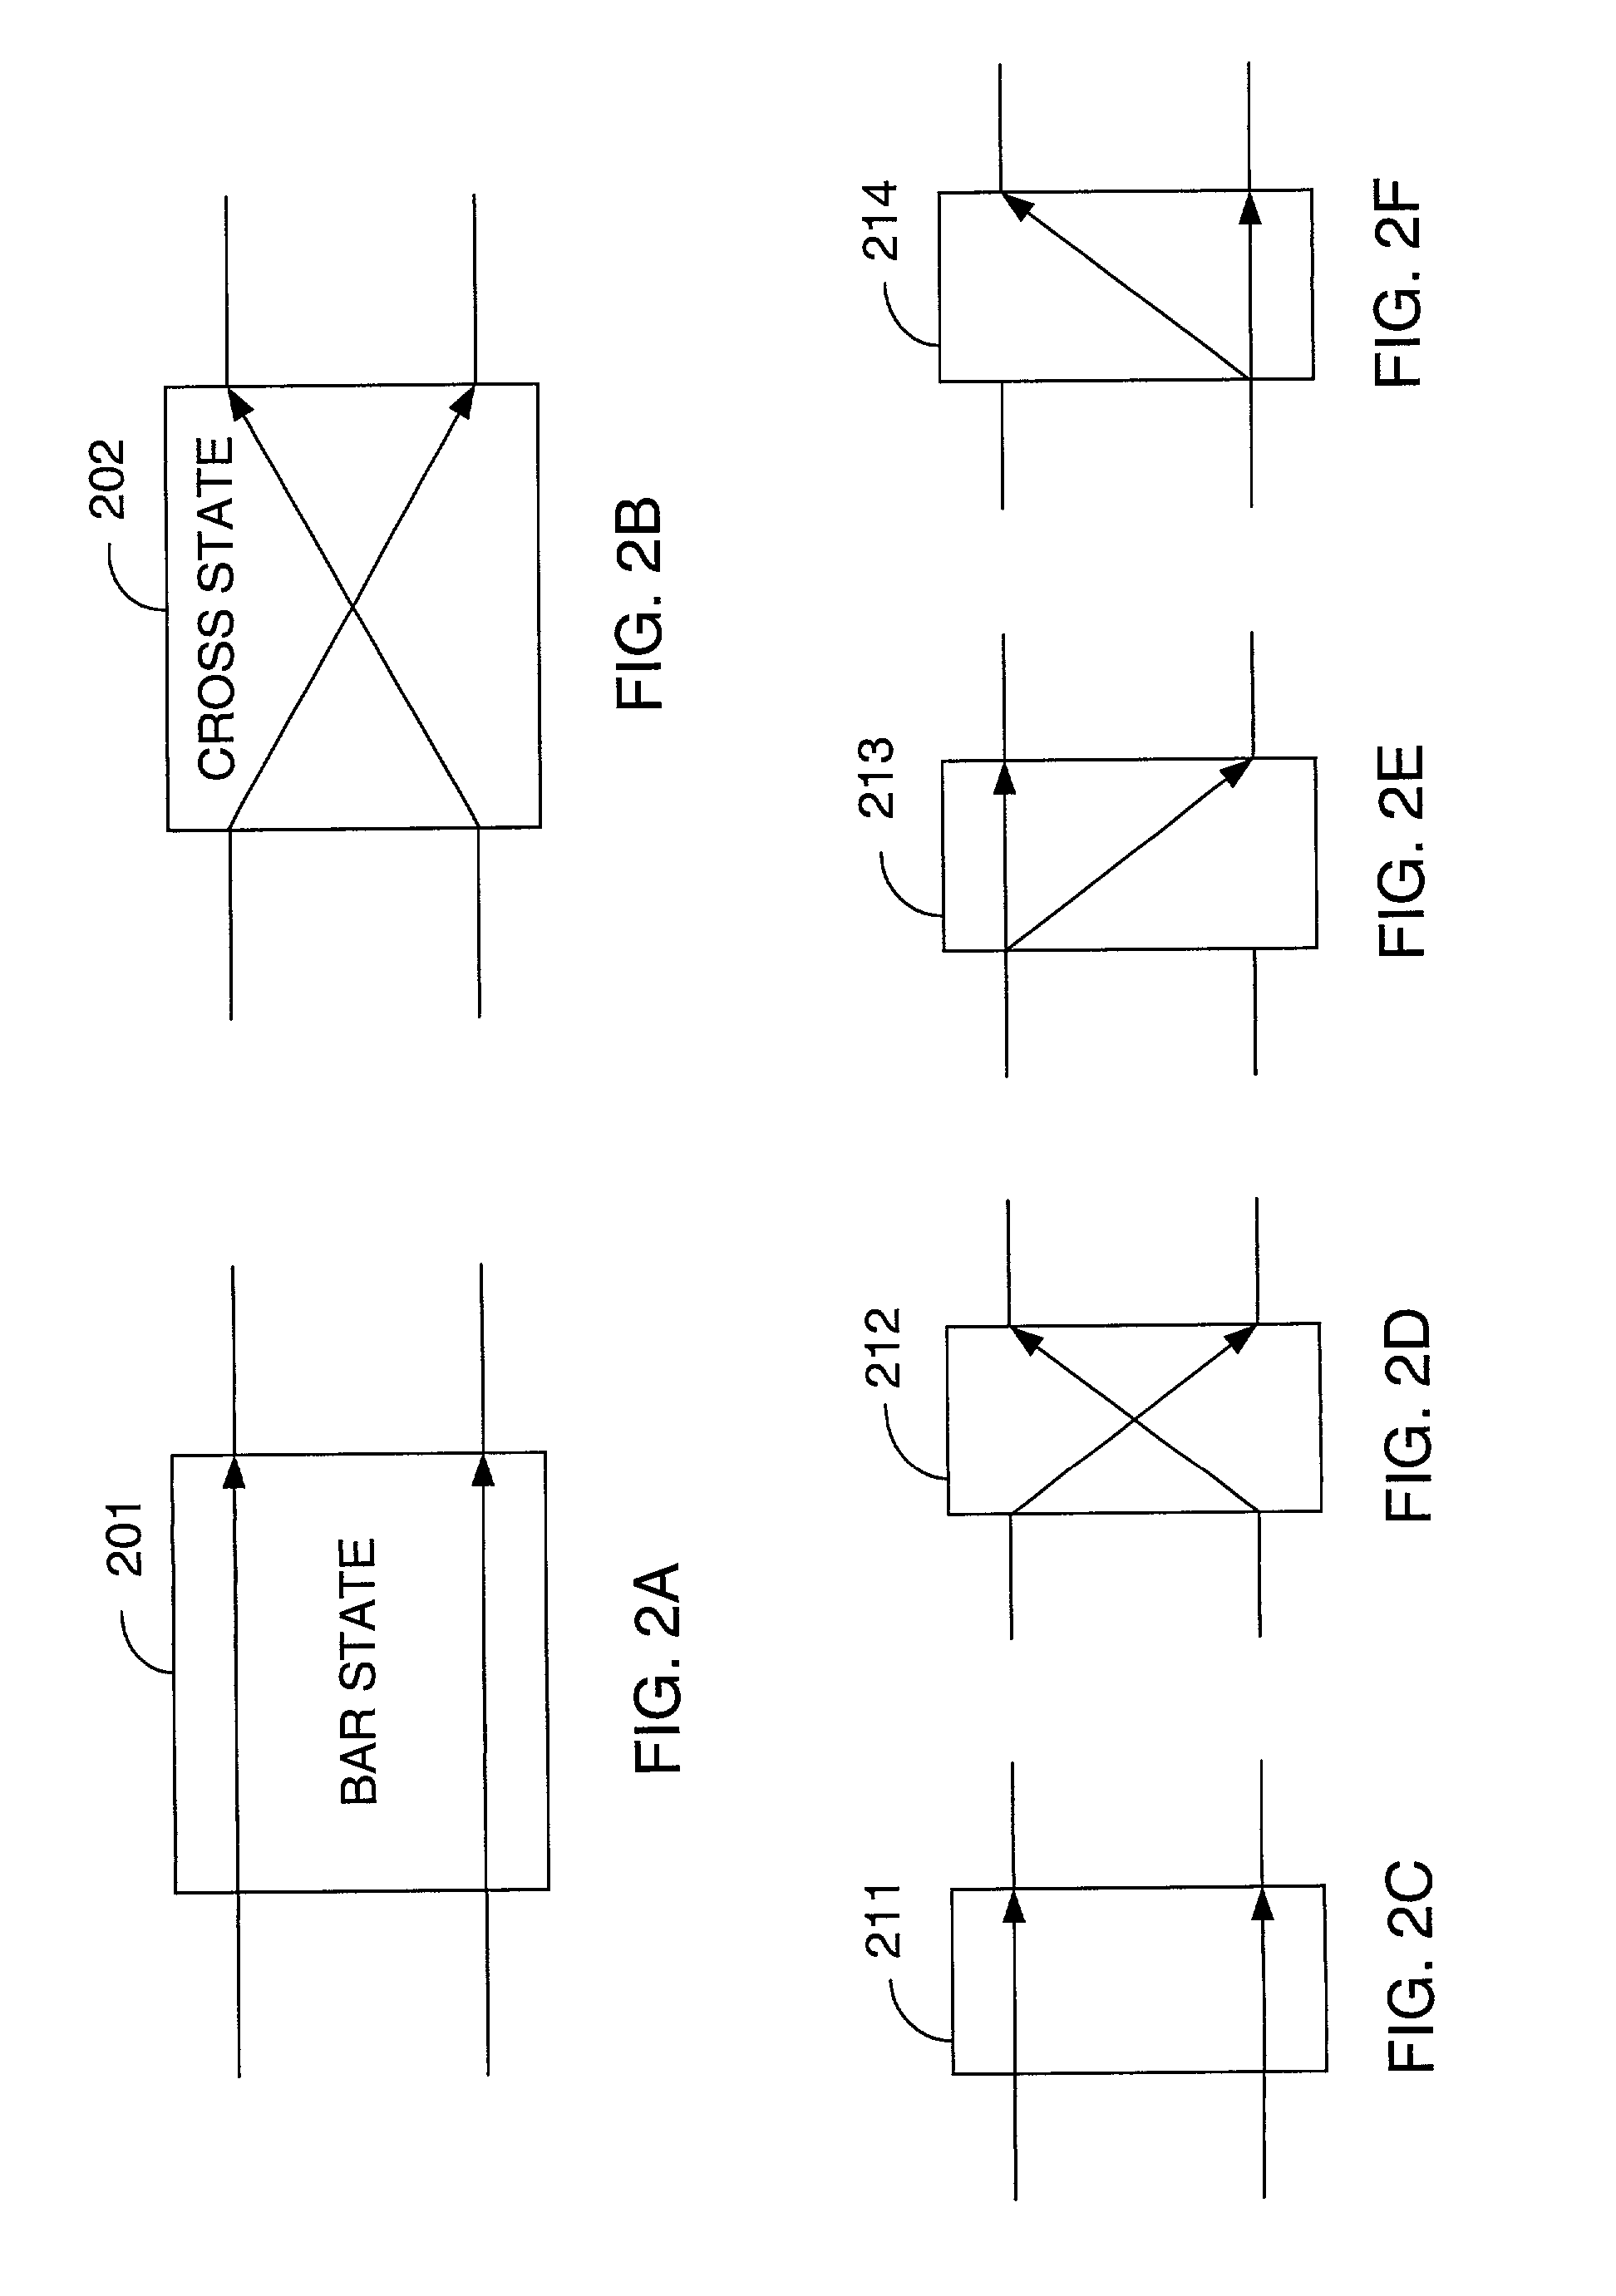 Scalable 2-stage interconnections